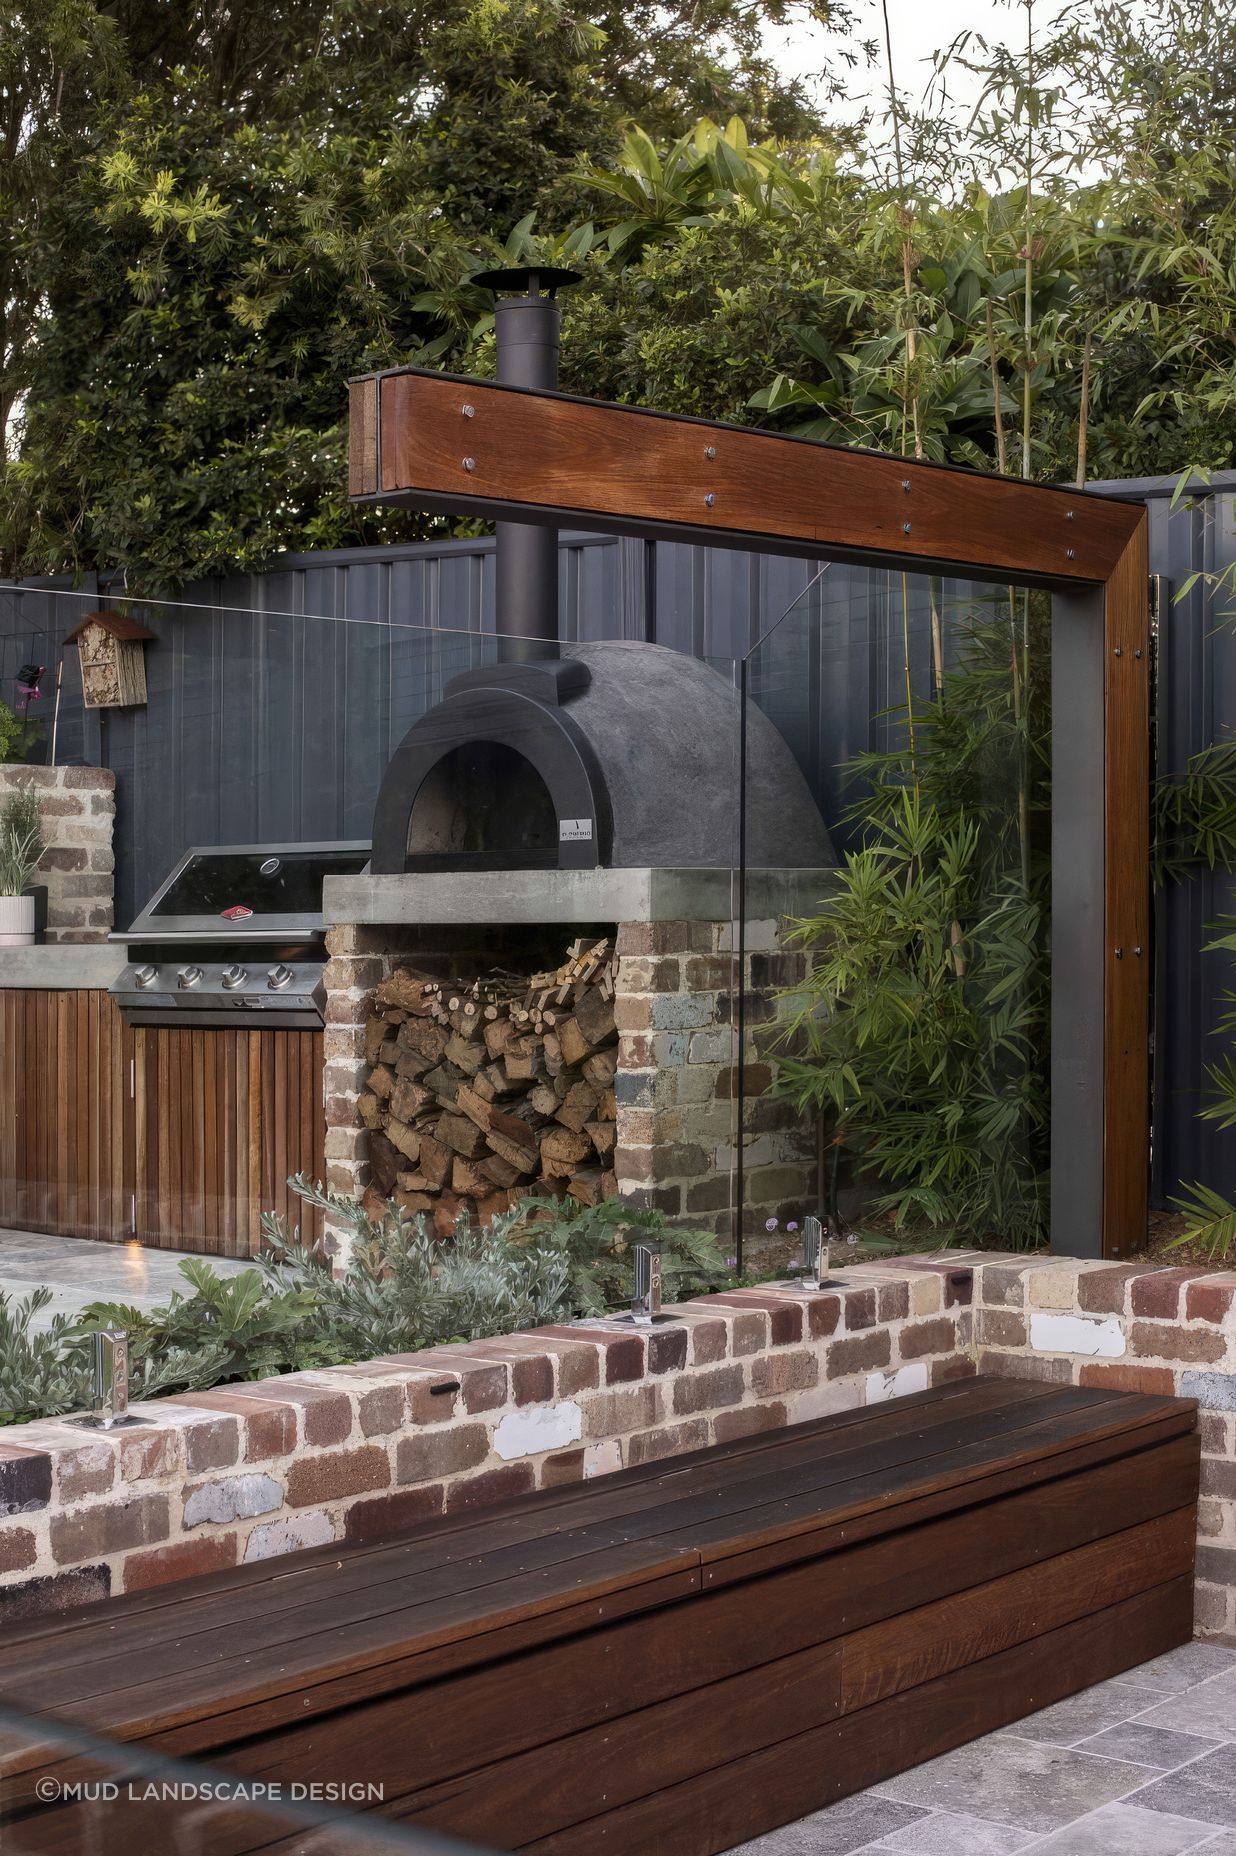 upNew-Lambton-Plunge-Pool-and-Pizza-Oven-15-scaled-fix-standard-scale-200x.jpg